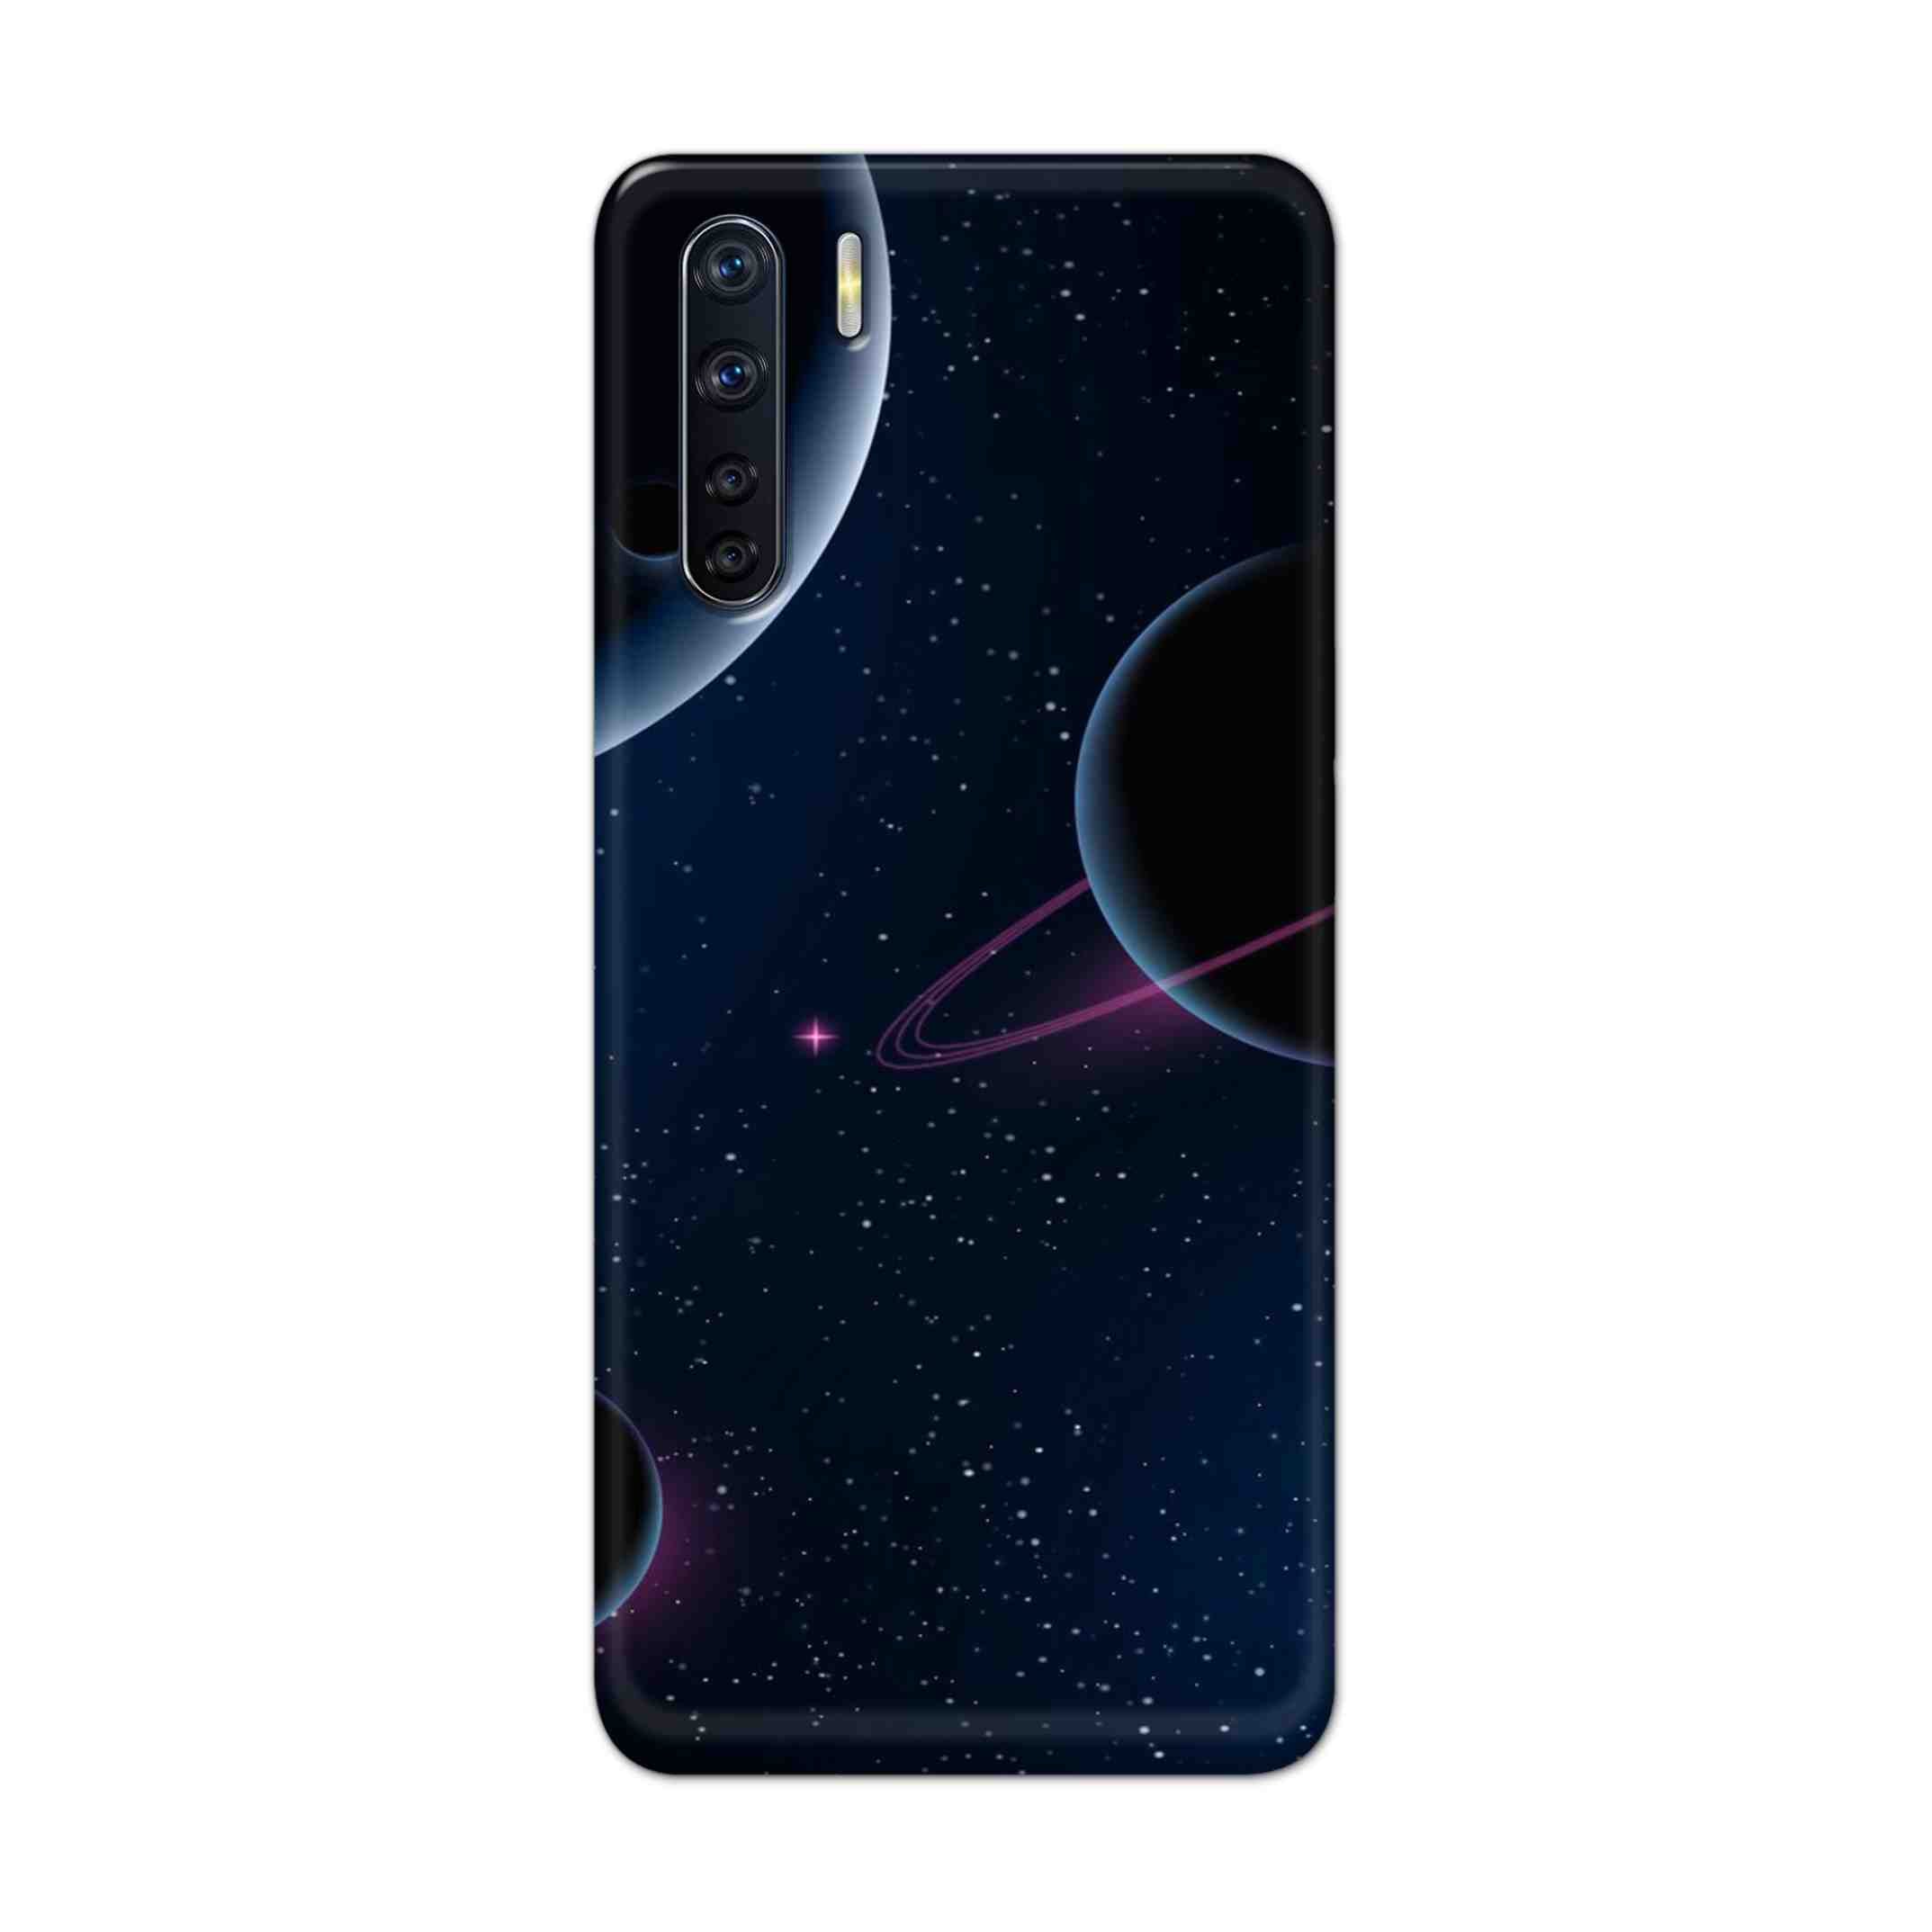 Buy Night Space Hard Back Mobile Phone Case Cover For OPPO F15 Online